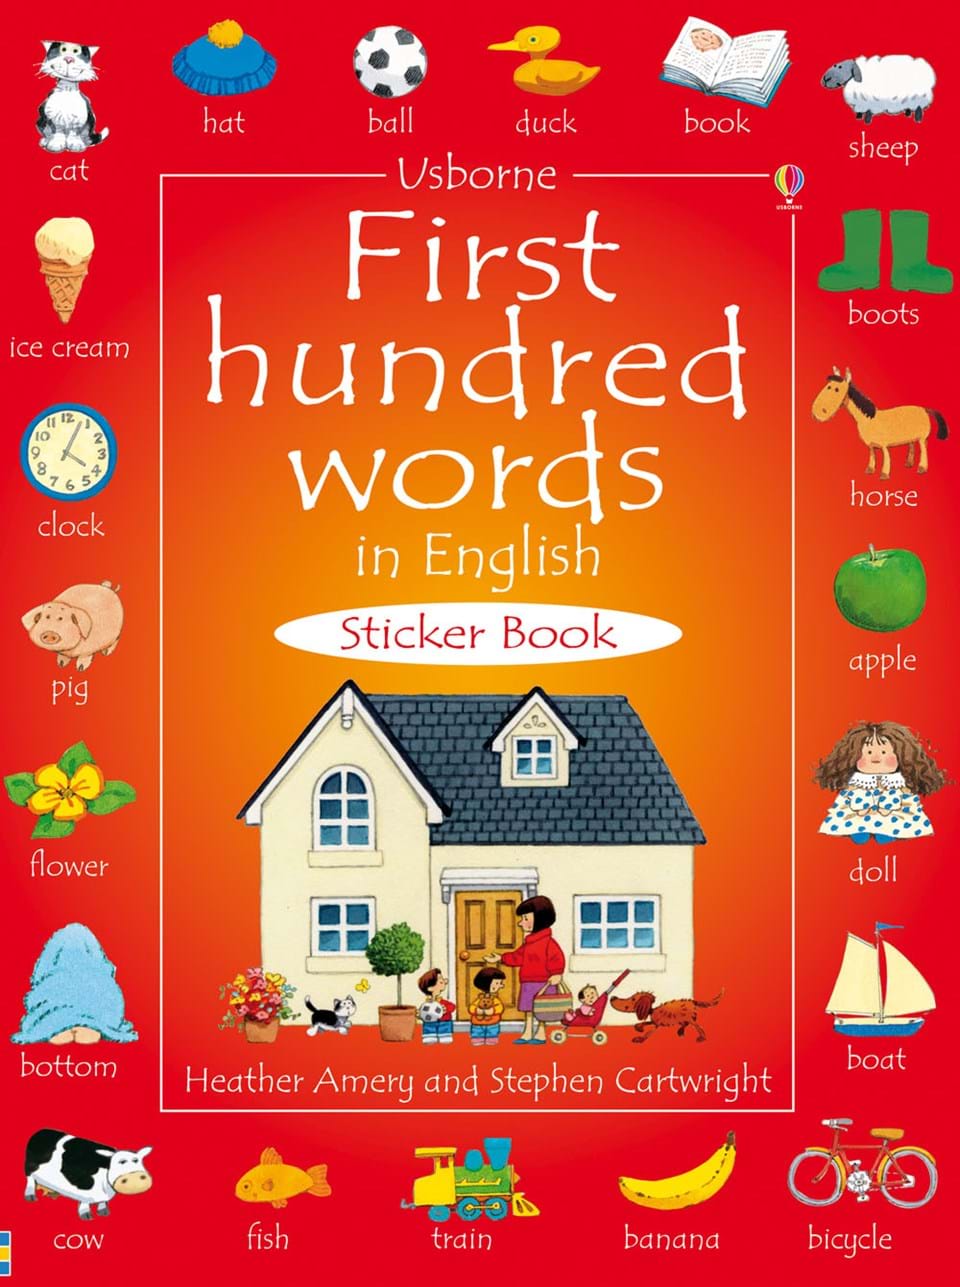 First hundred words in English Sticker book